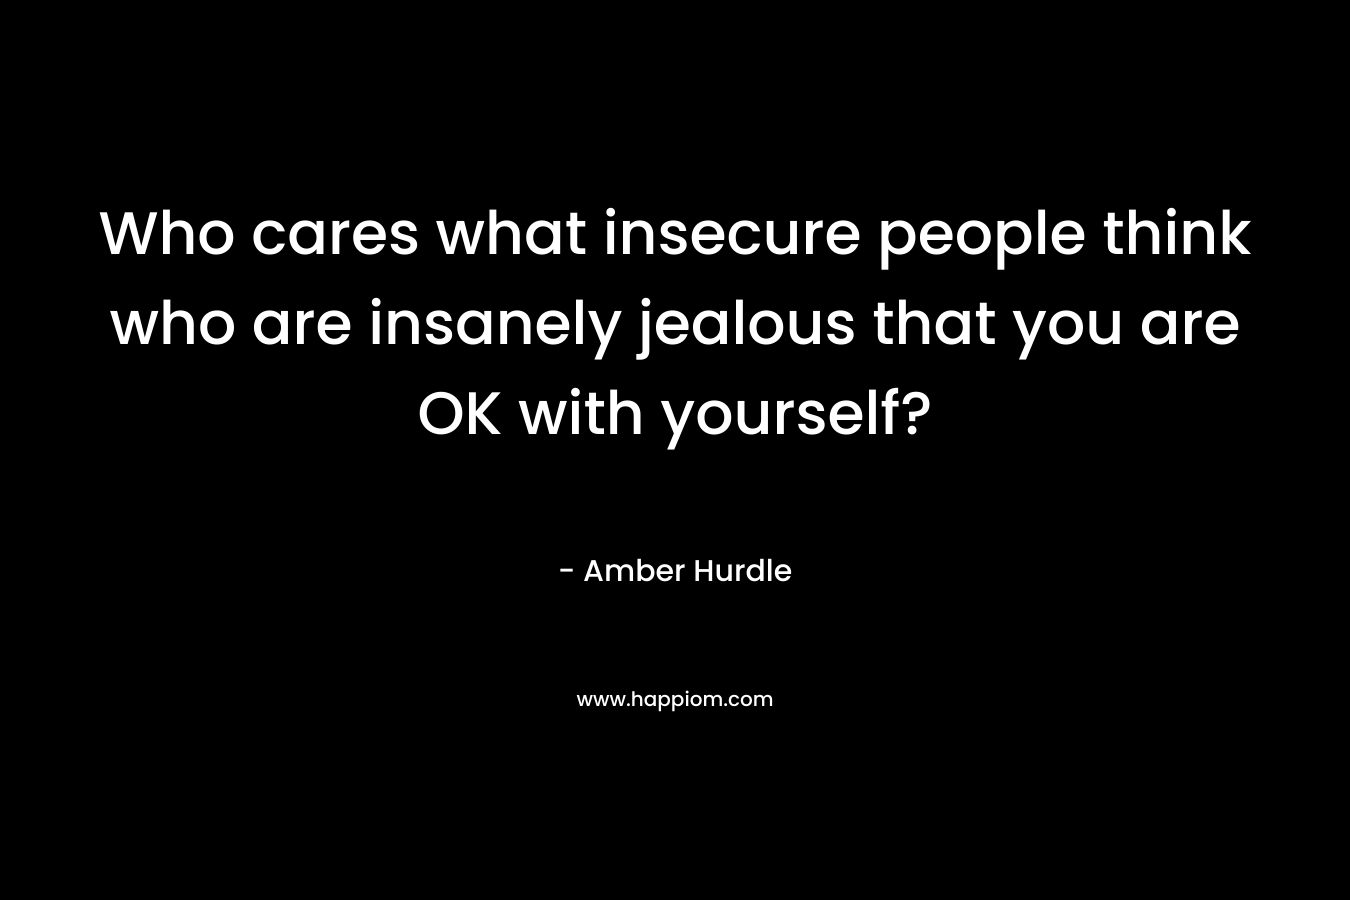 Who cares what insecure people think who are insanely jealous that you are OK with yourself?